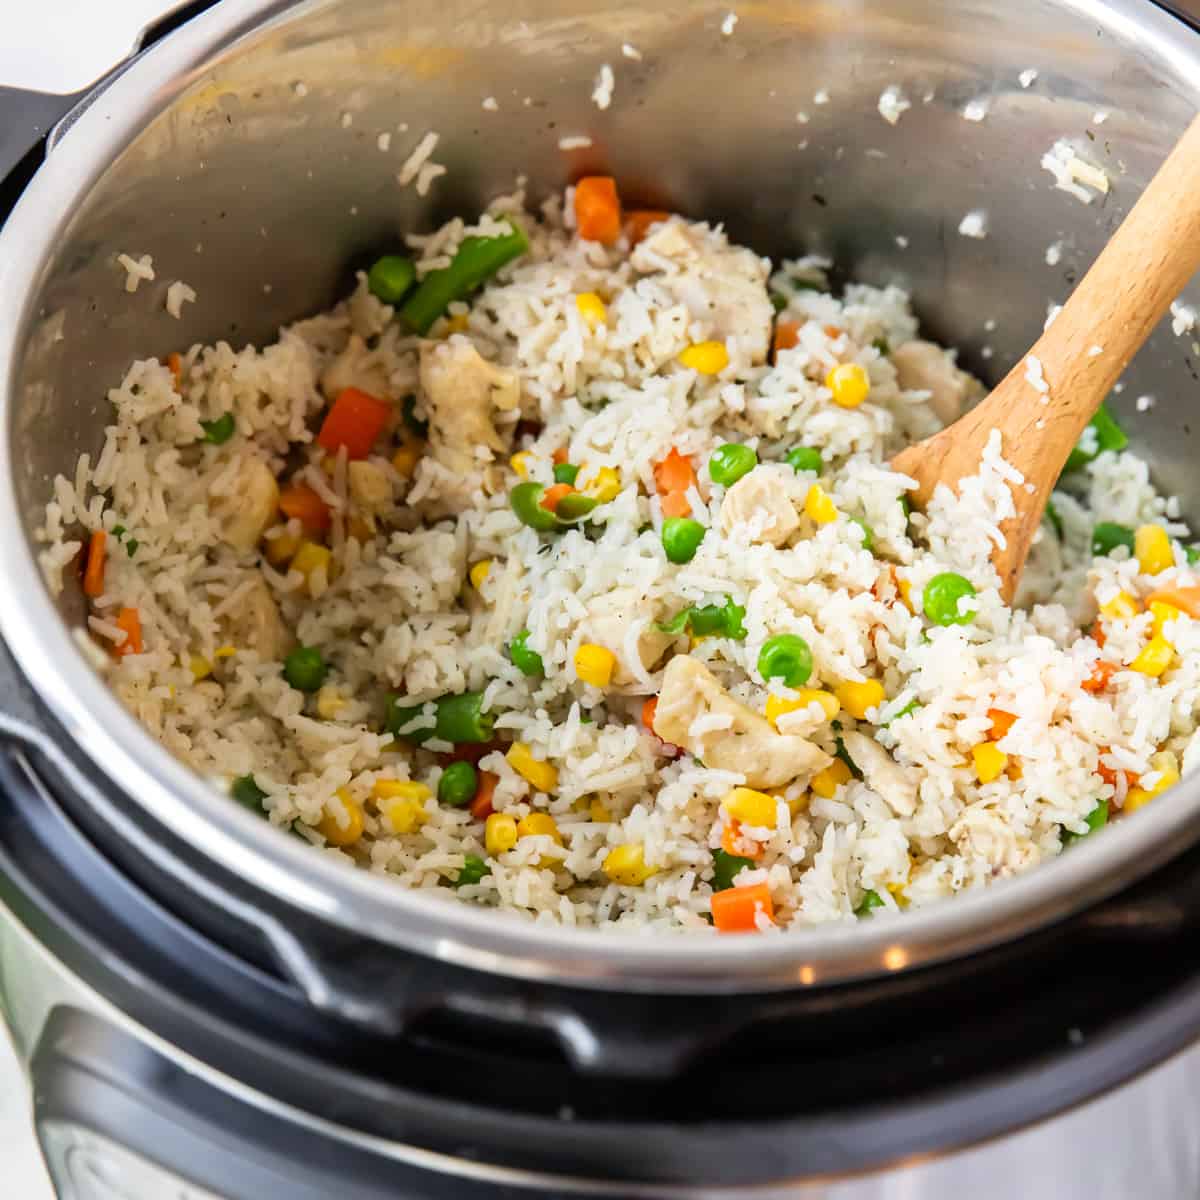 How To Make Instant Pot Chicken and Rice